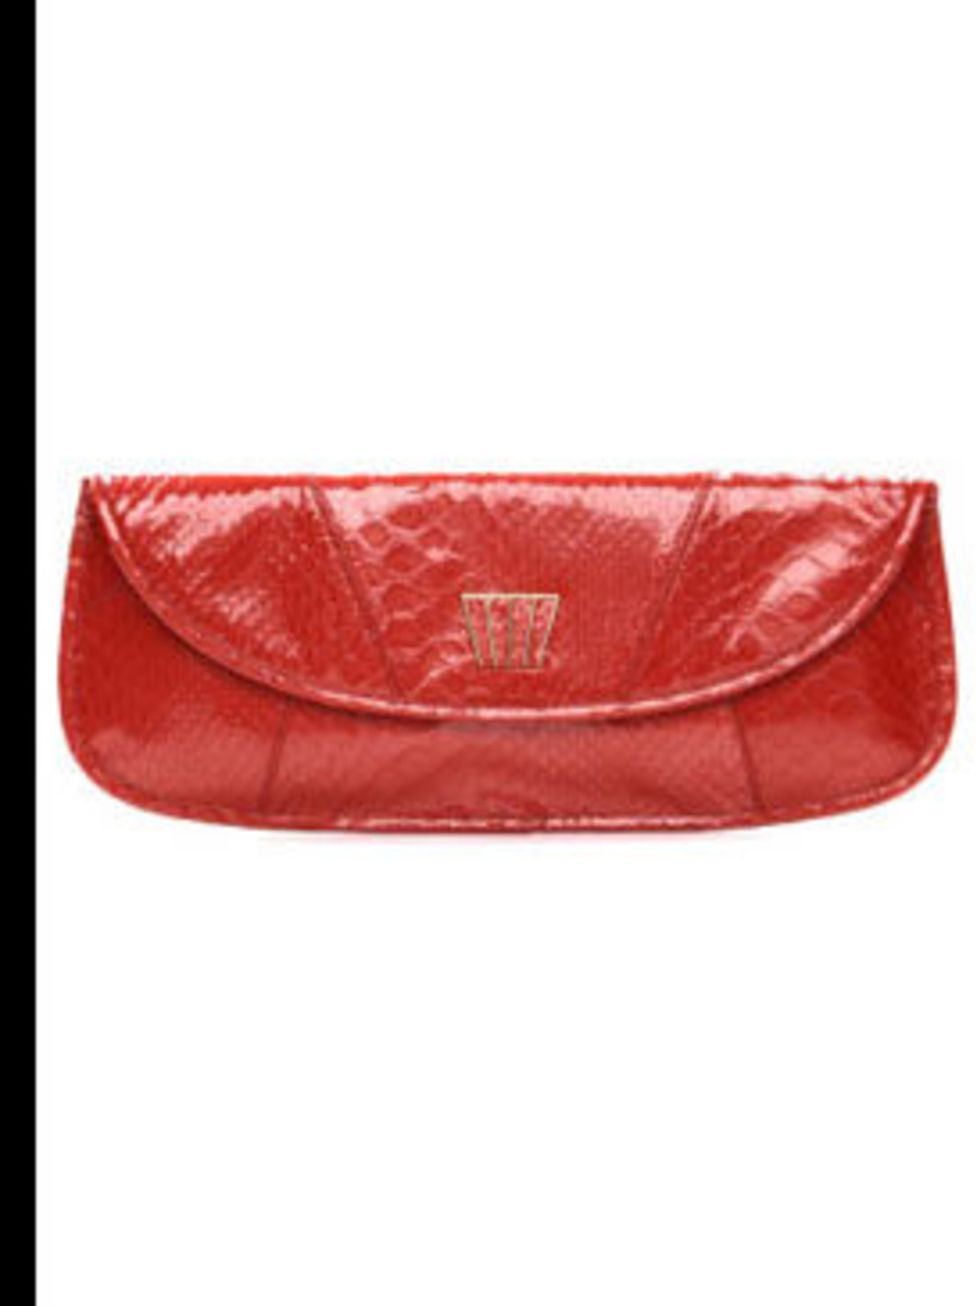 <p>Oversize clutch, £130 by <a href="http://www.tedbaker.com/shop.do?cID=607&amp;pID=6069">Ted Baker</a></p>